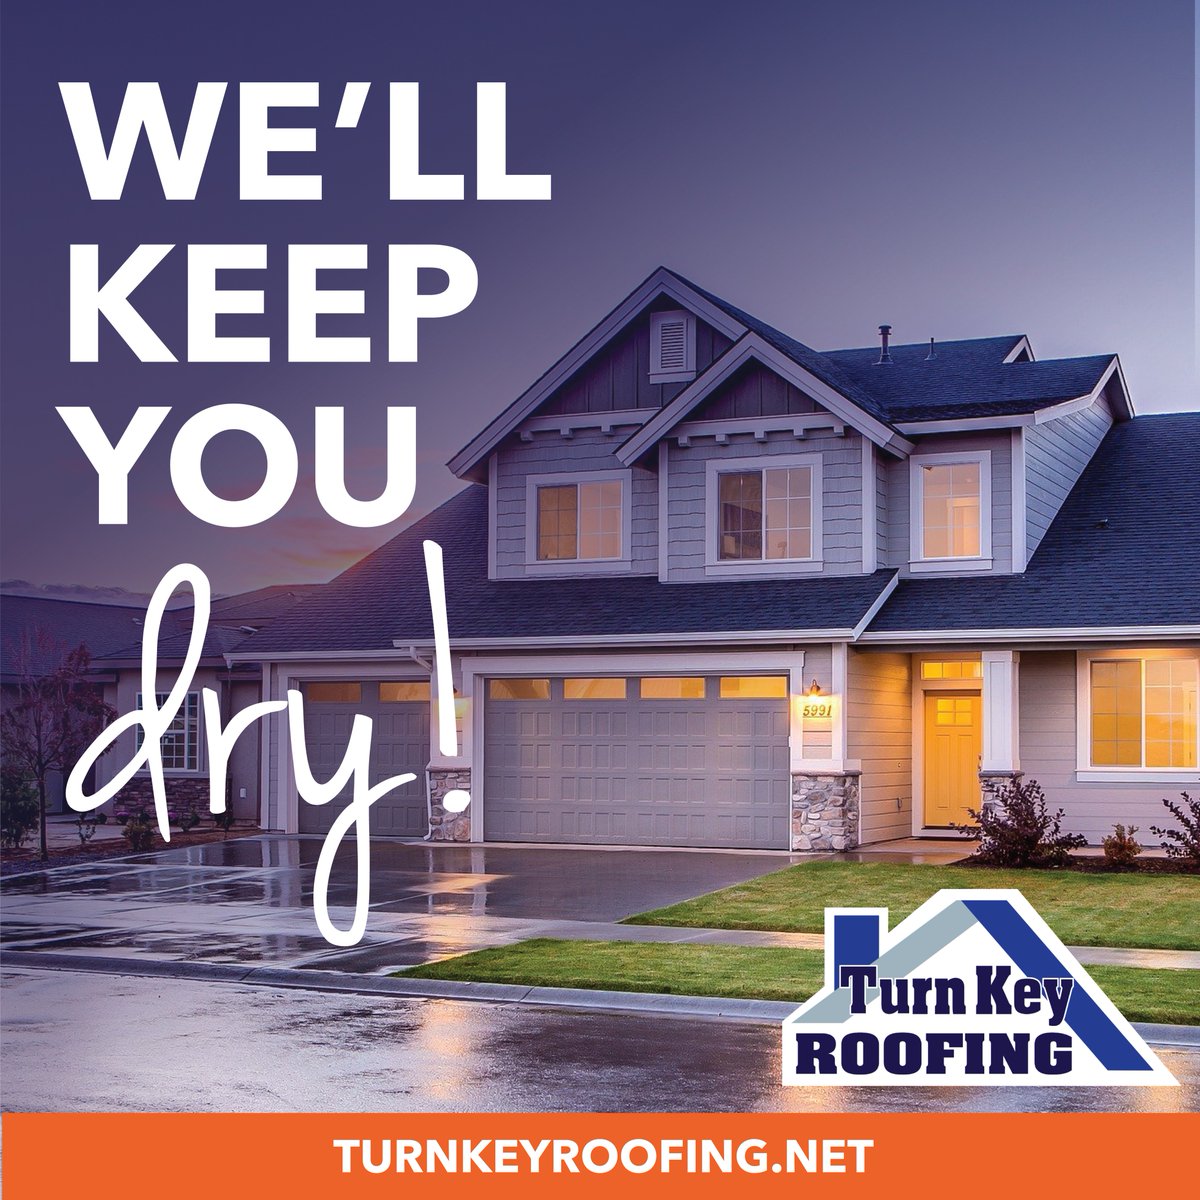 We will keep you dry this summer!

Give us a call for your FREE roofing consultation.📲864.241.8133

#RoofingContractor #Roofing #NewRoof #Andersonismytown #YeahthatGreenville #TurnKeyRoofing #RoofInspection #Home #stormdamage #residential #roofing